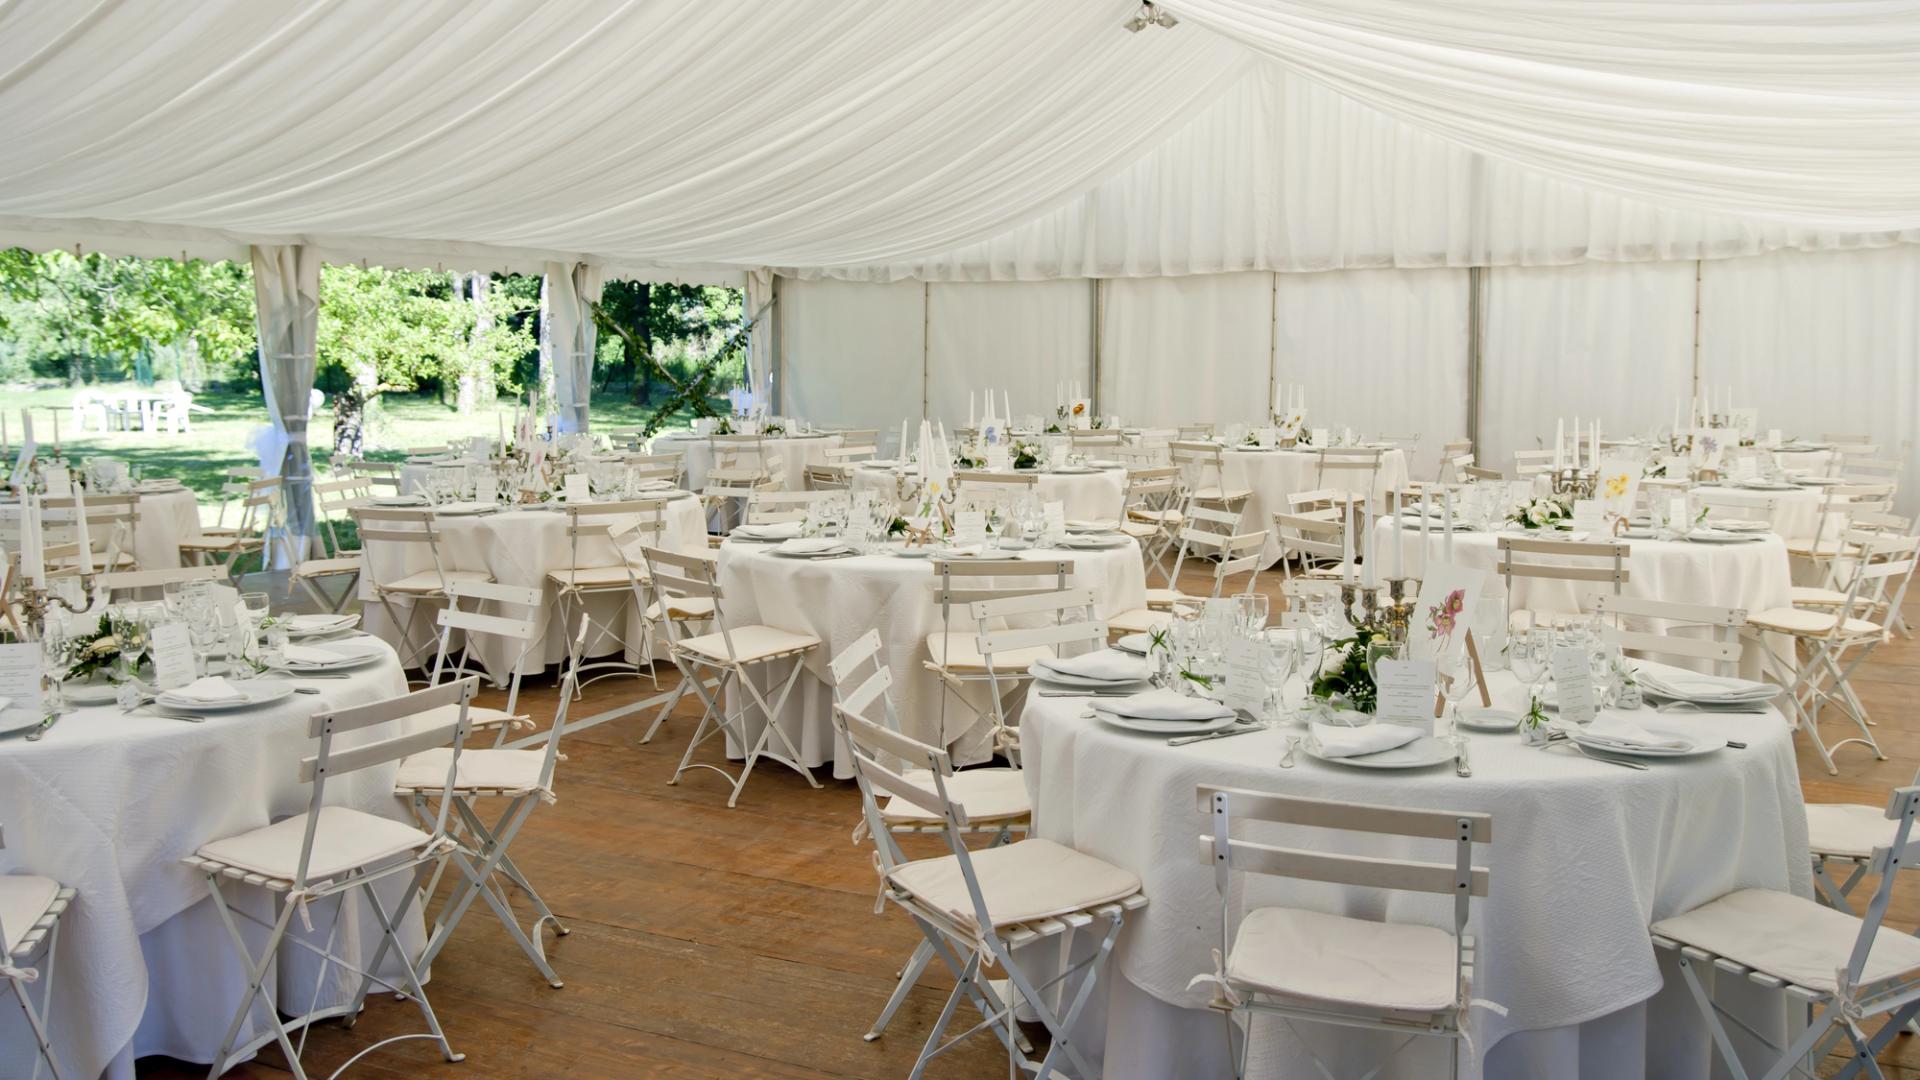 Marquee Wedding Venues for Hire in East London